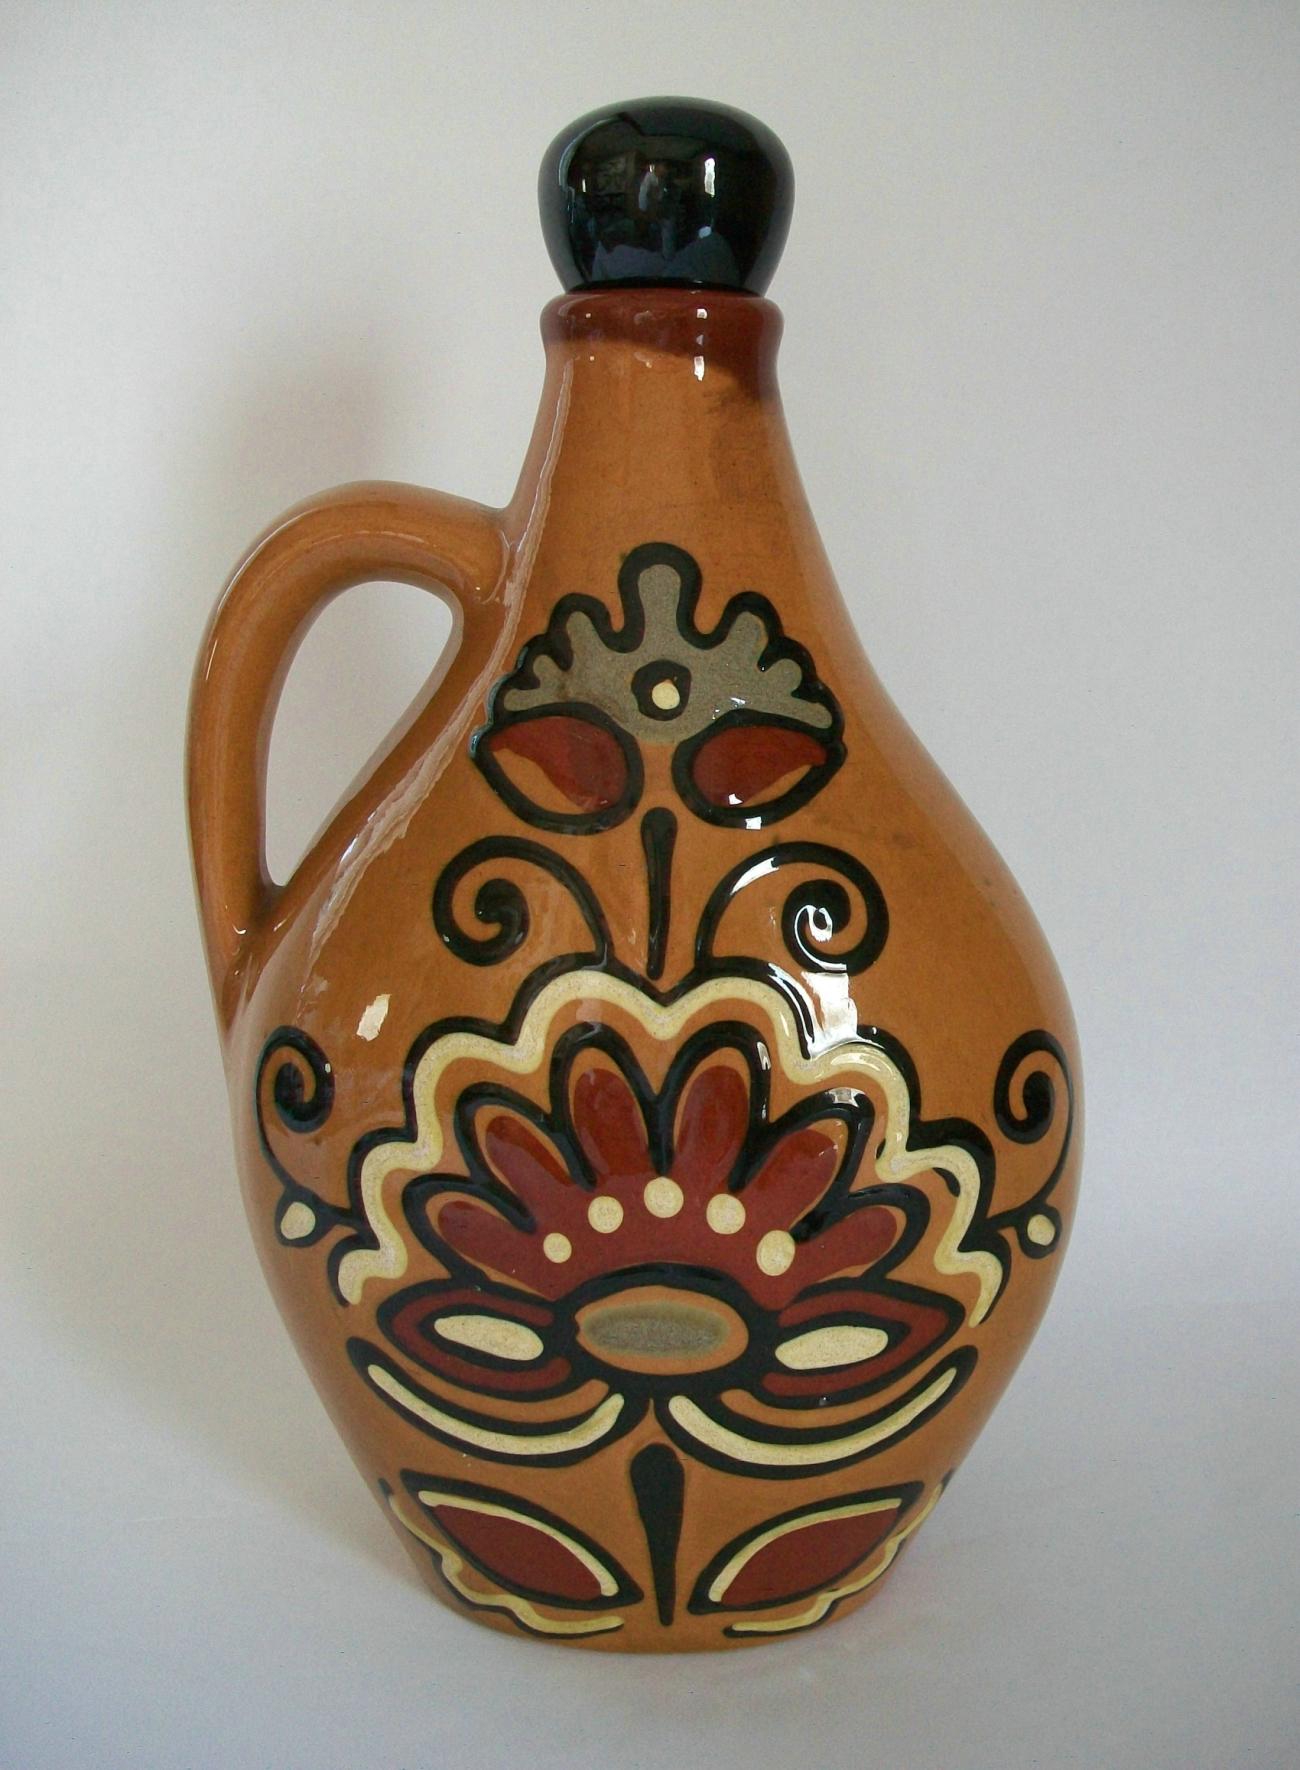 Vintage Gouda folk art pottery jug or decanter with stopper - hand painted stylized floral decoration to the front and back - clear high gloss glaze with slip details - remnants of old factory or retail label to the base - unsigned - Netherlands -